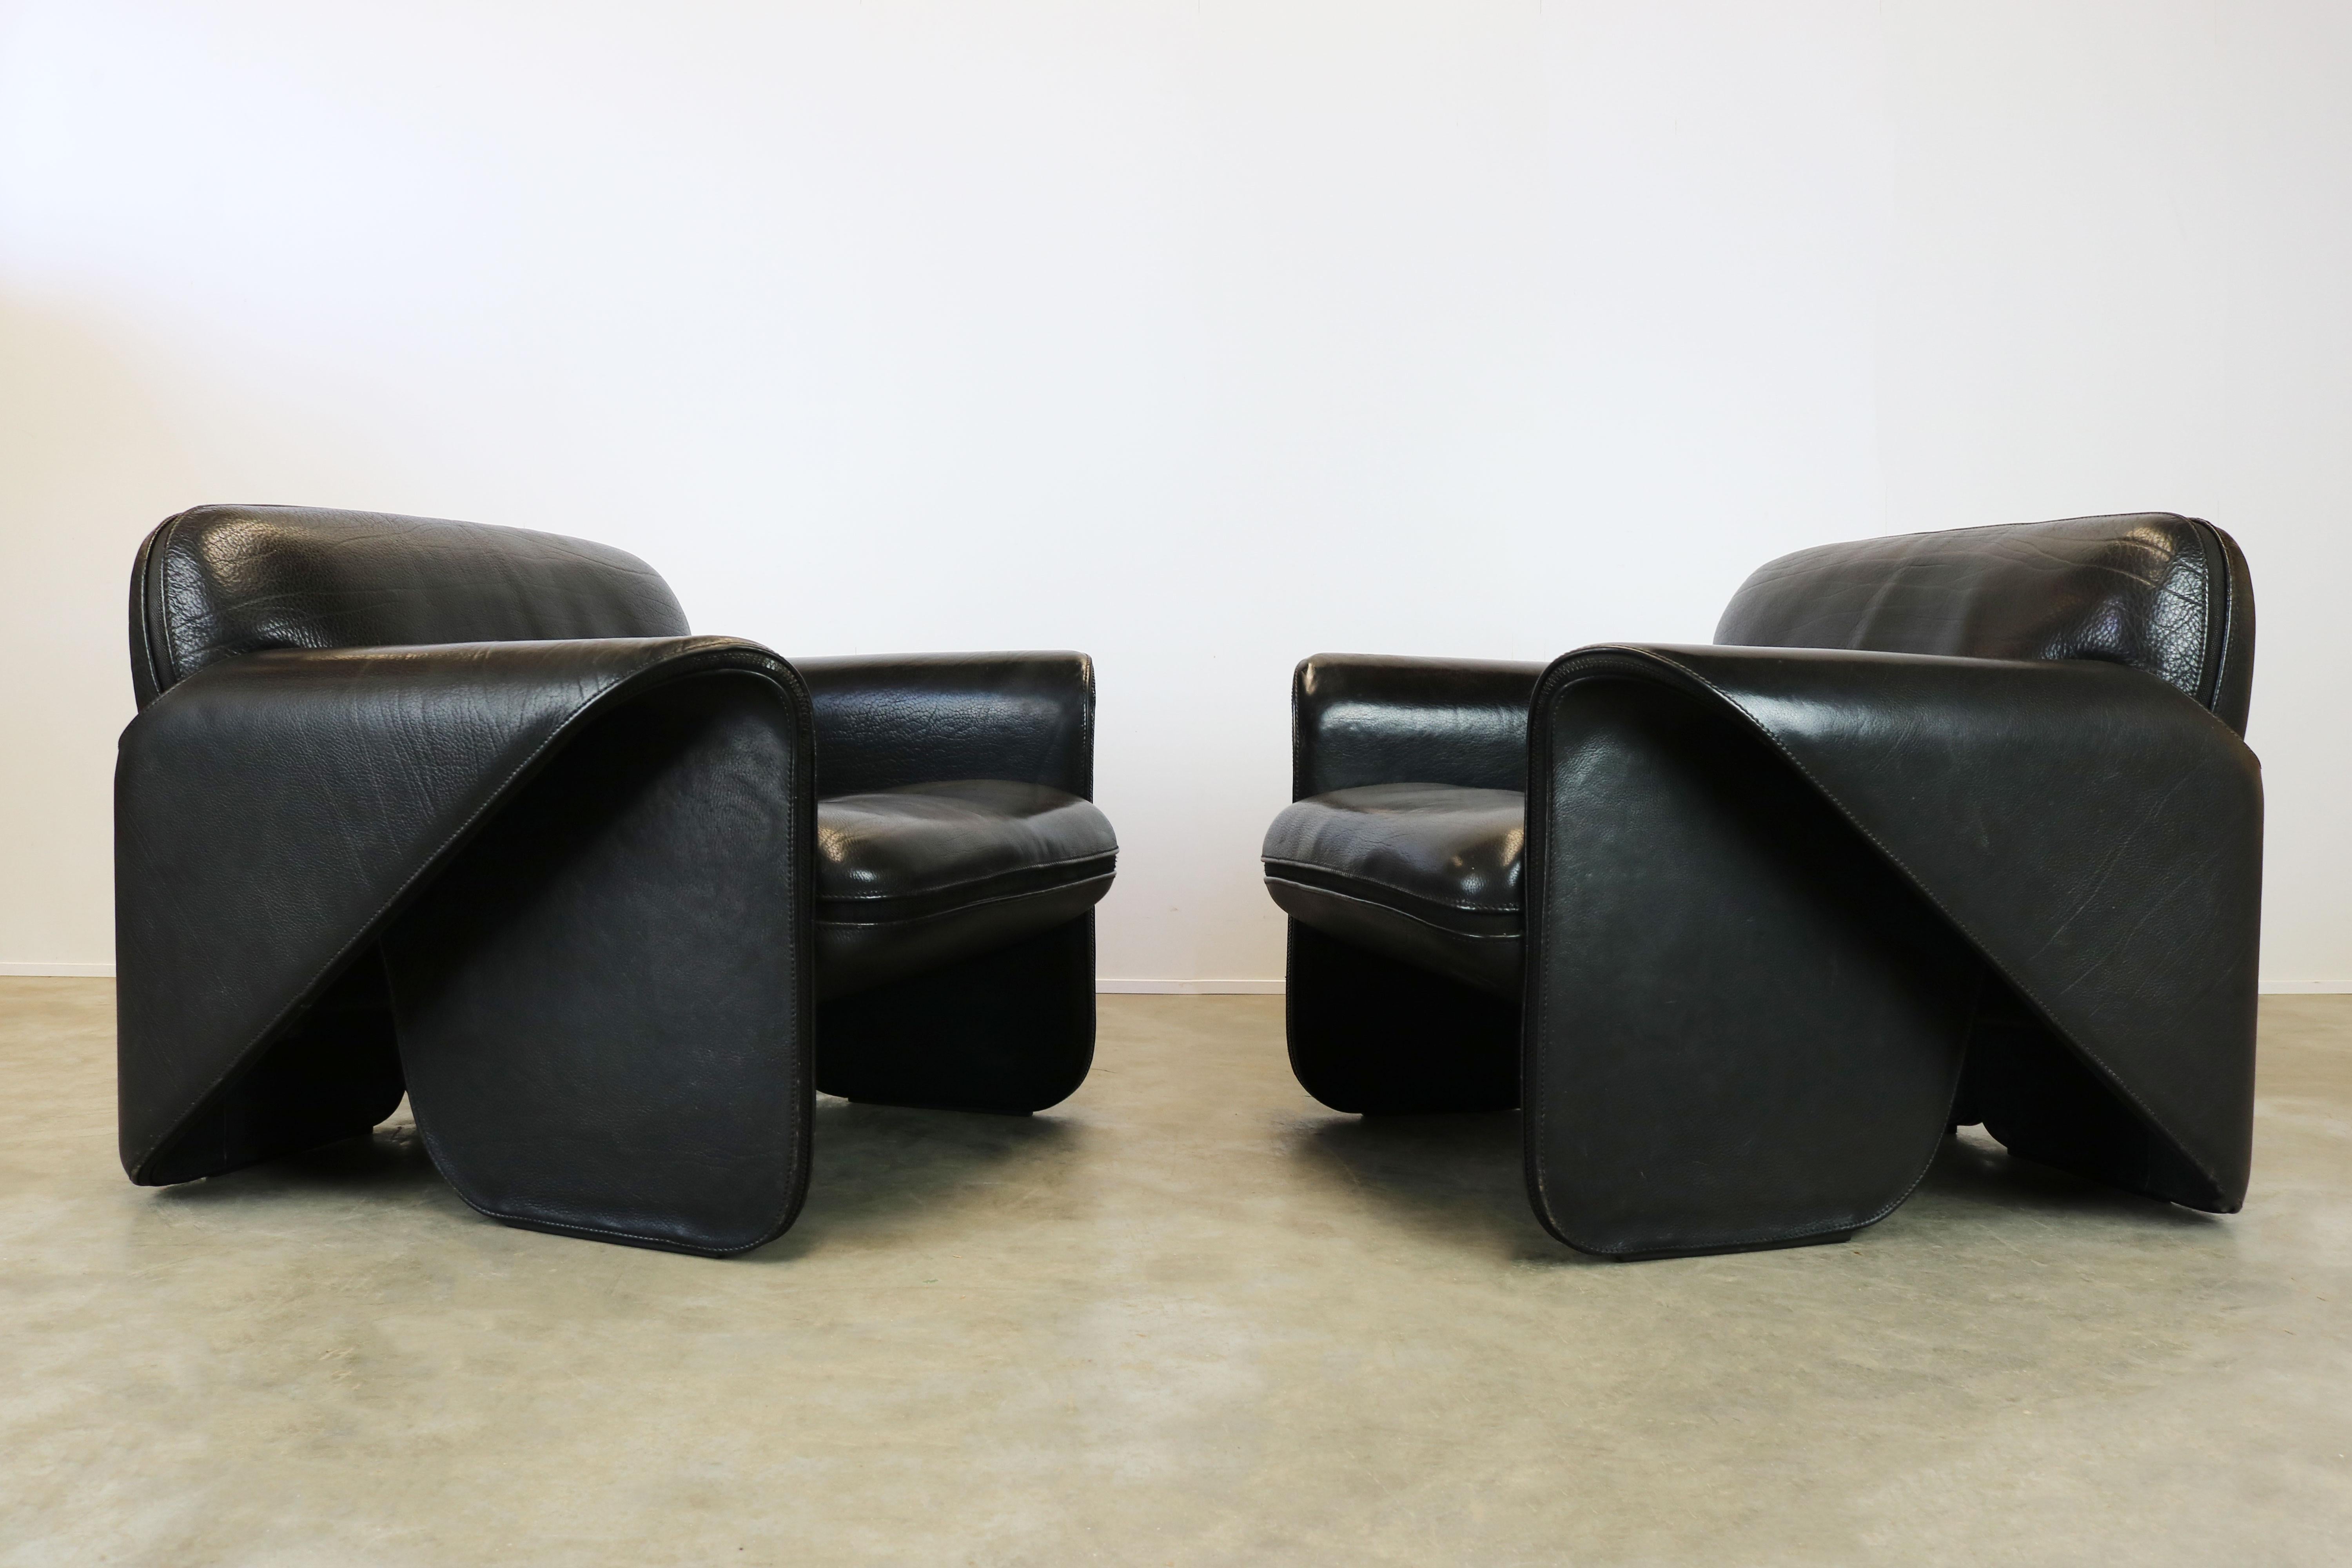 Mid-Century Modern Rare Pair of Swiss De Sede Ds 125 Lounge Chairs by Gerd Lange 1978 Black Leather